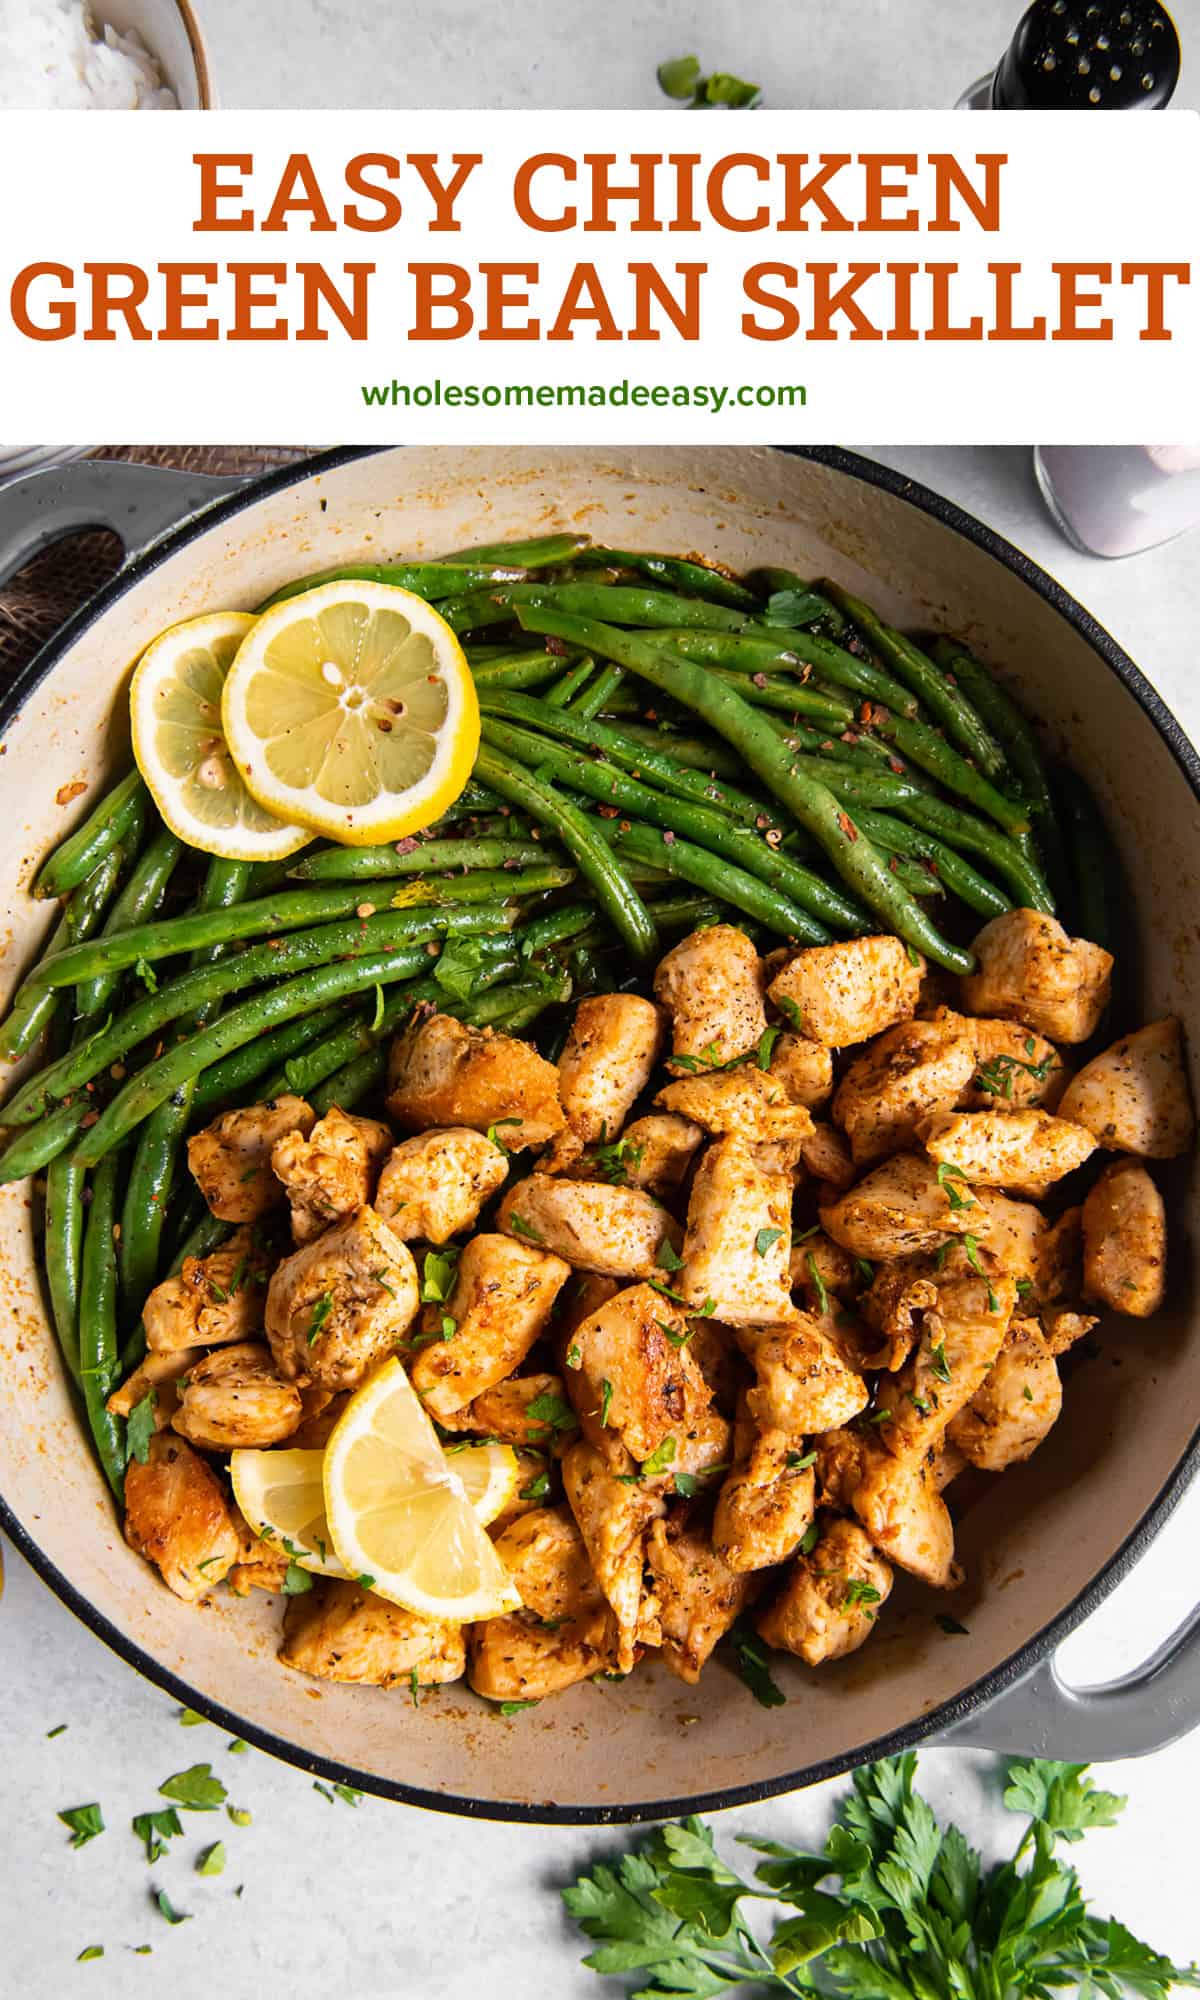 A top down shot of cooked chicken chunks and green beans in a skillet with lemon slices with text.